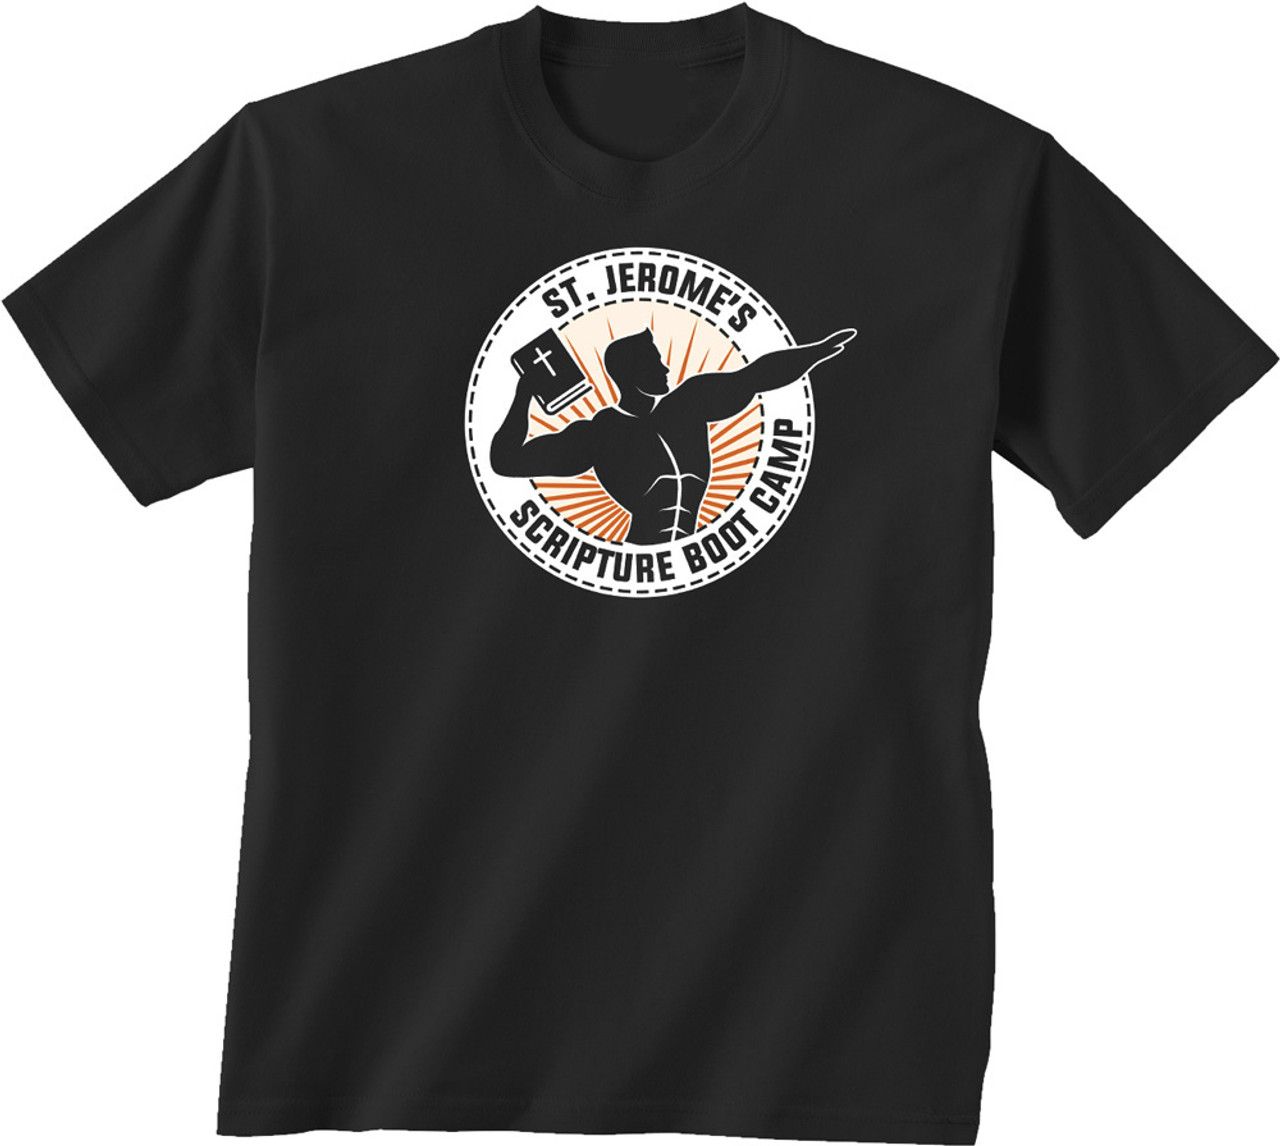 St. Jerome Boot Camp Black T-Shirt - Catholic to the Max - Online ...